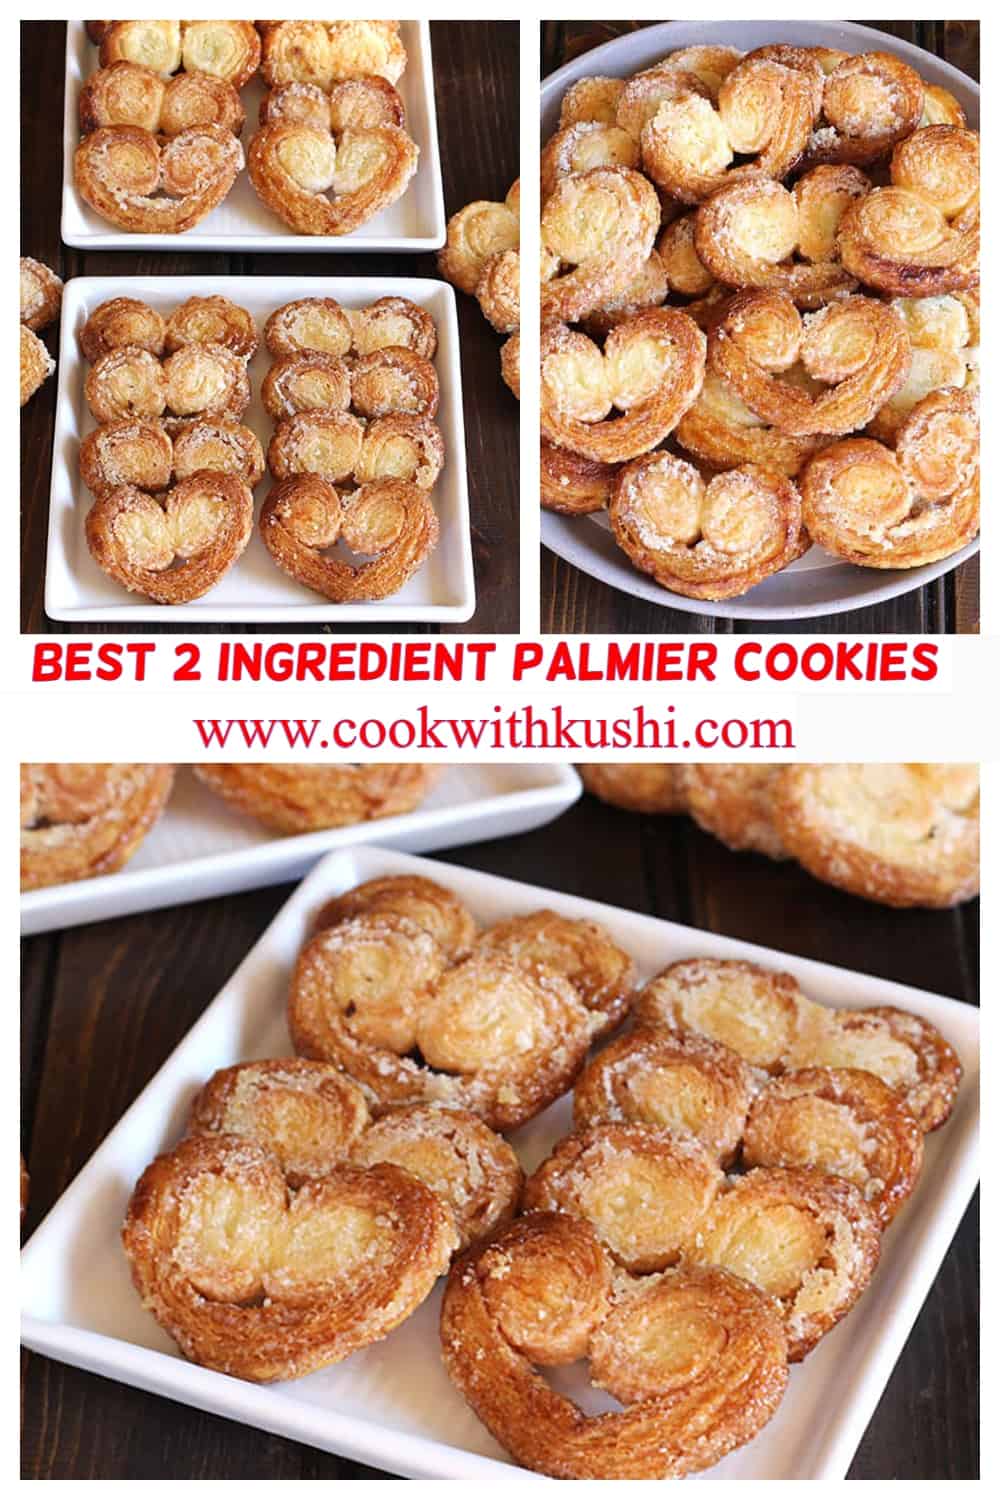 Best, easy crispy and flaky 2 ingredient palmier cookies, french pastry, butterfly or heart shaped biscuits 